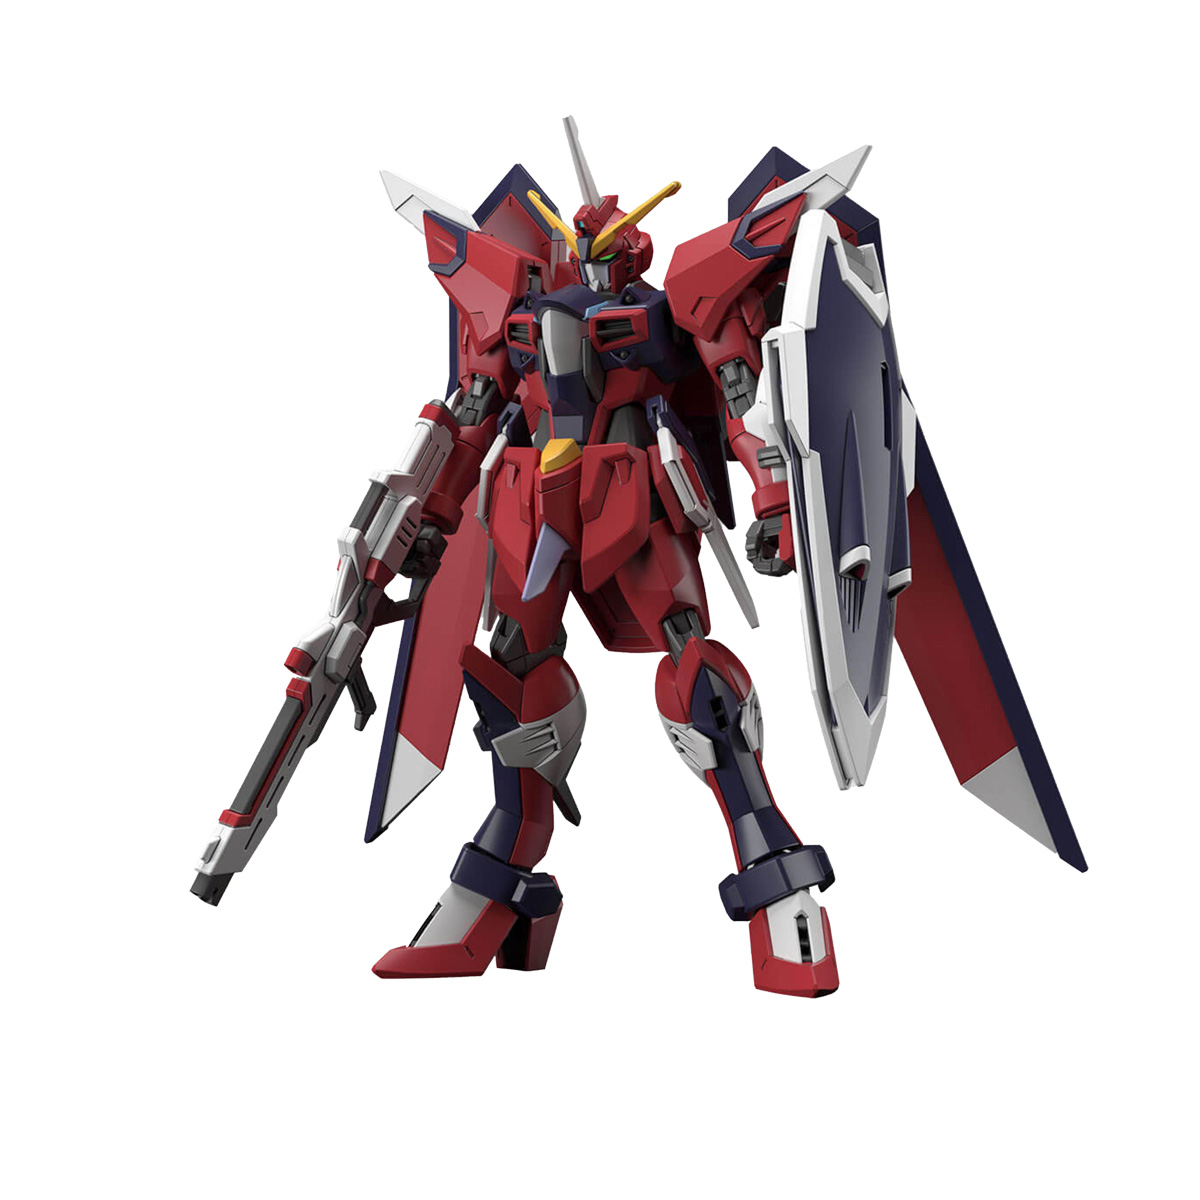 Picture of Bandai BAN2654673 1-144 Scale No. 244 Immortal Justice Gundam Seed Freedom Model Kit